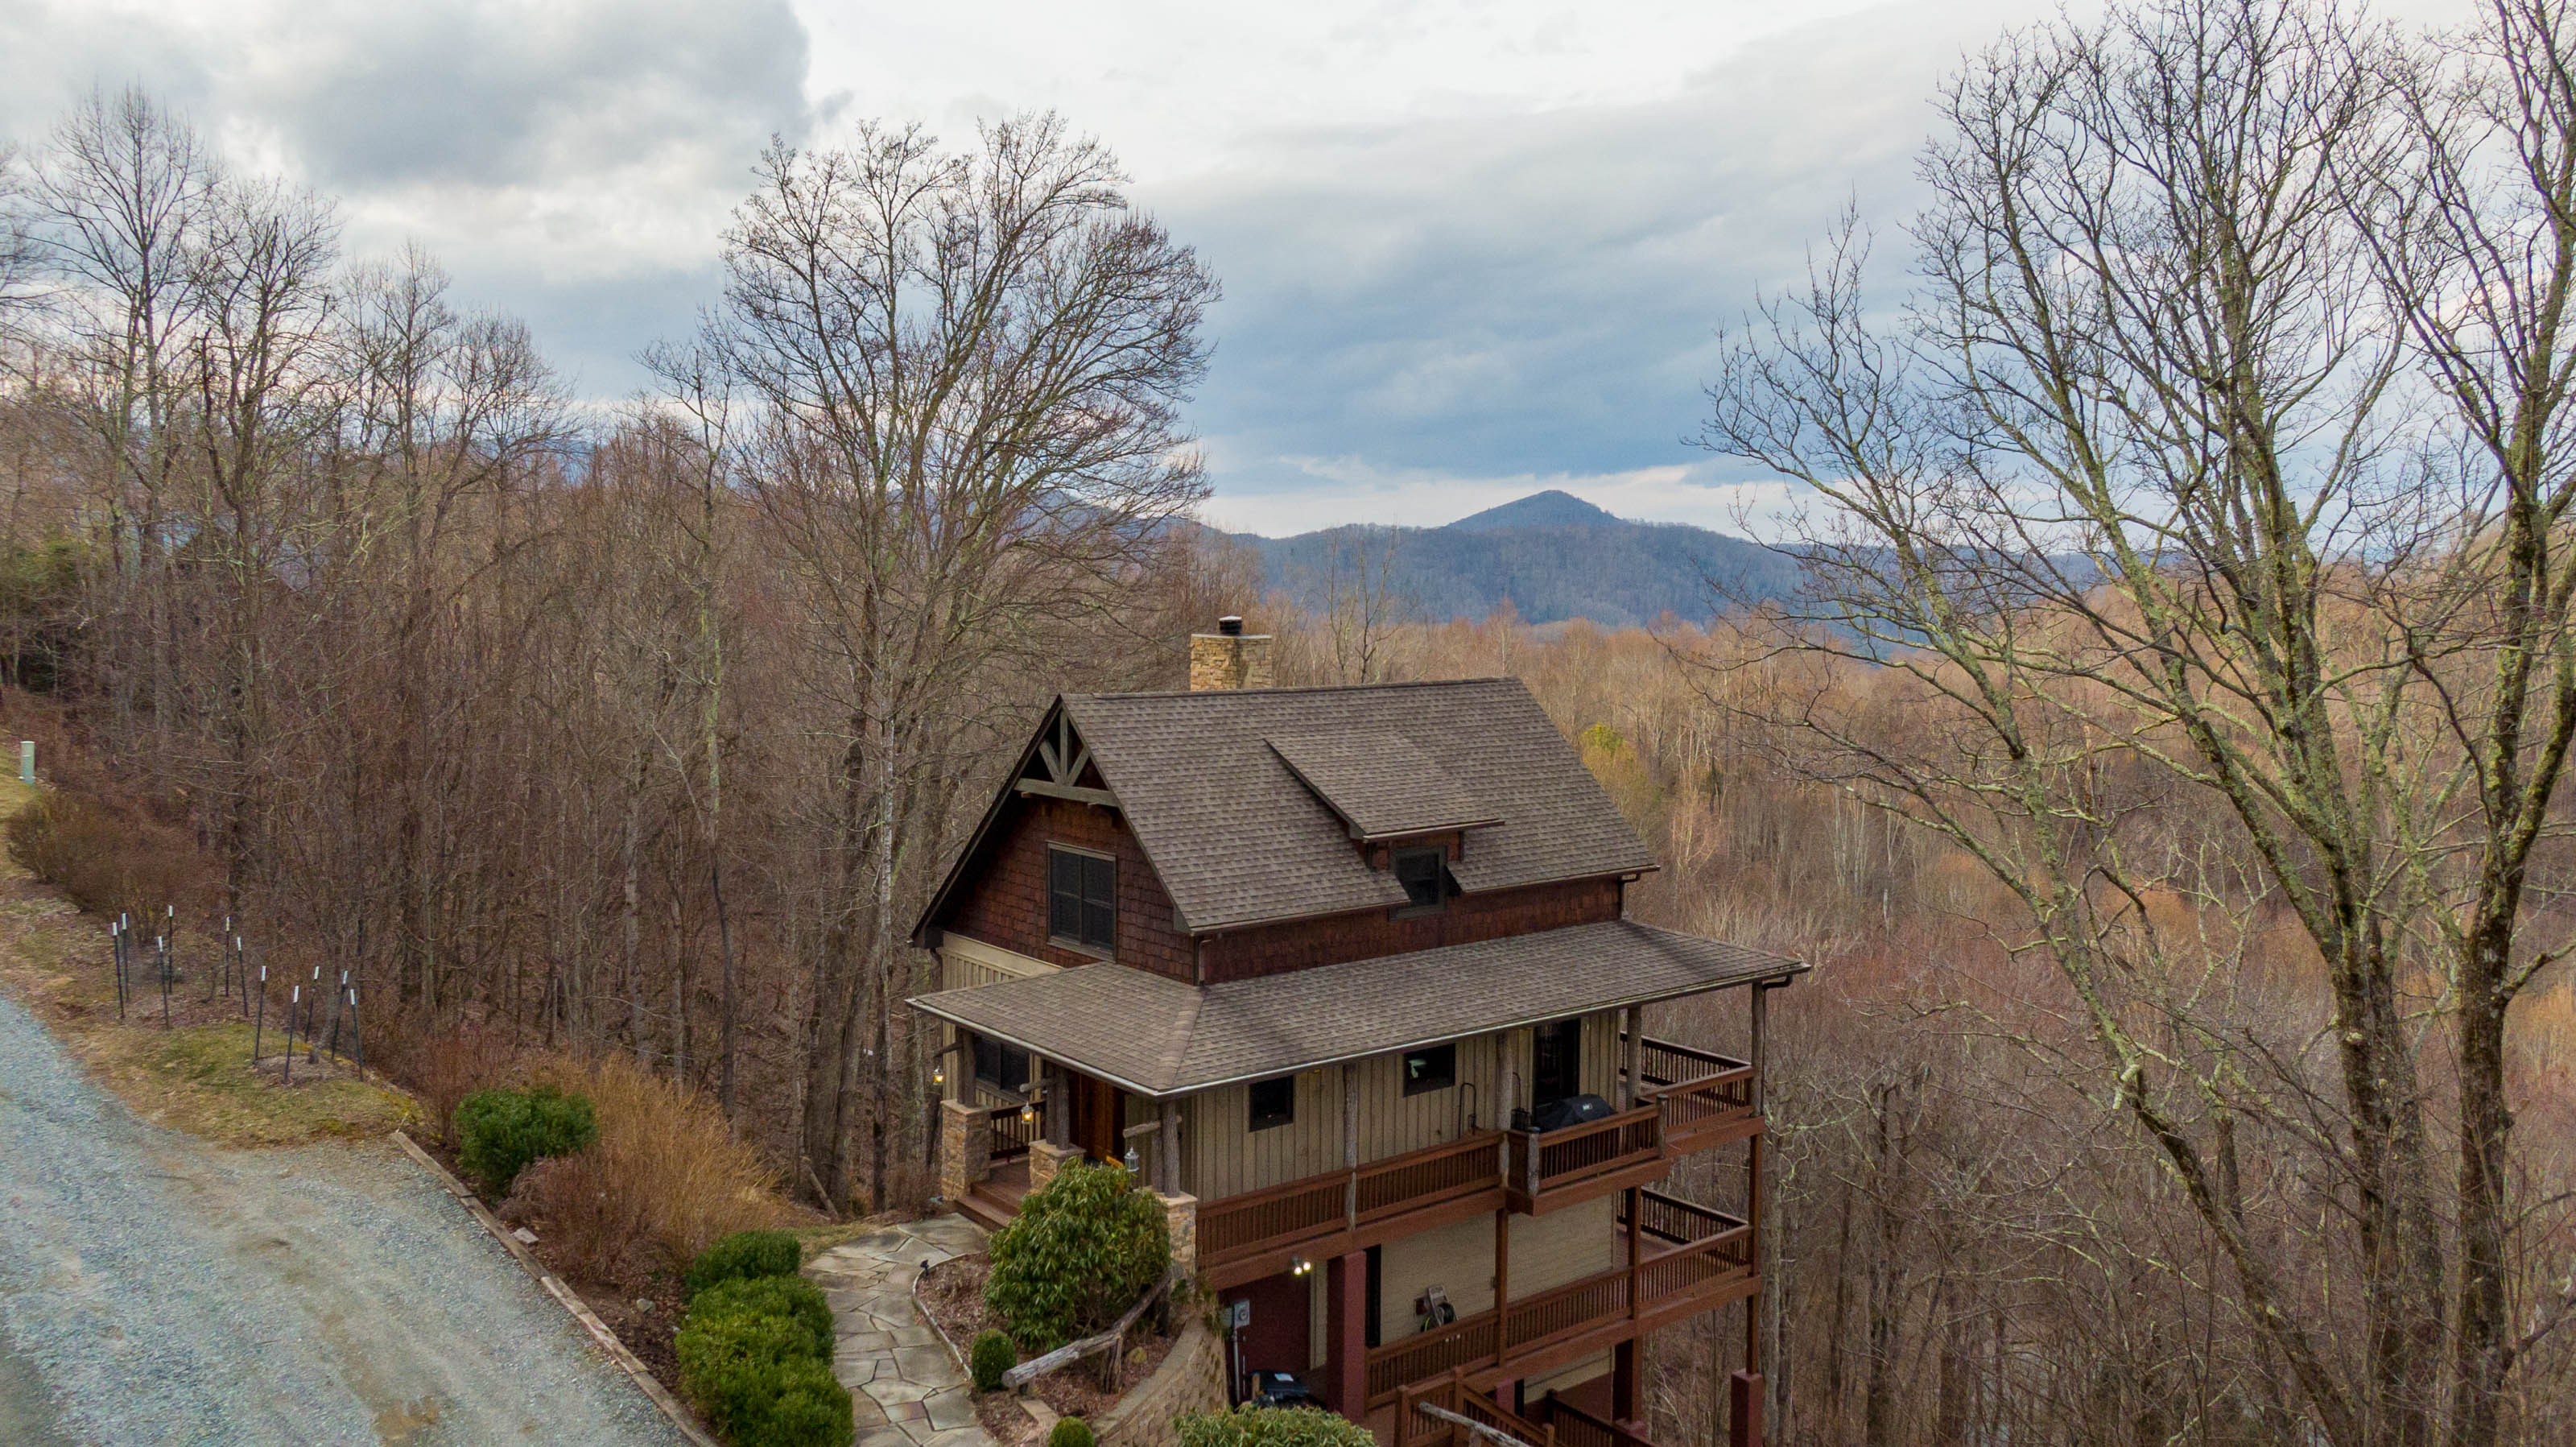 Deer Moments - 3 bedroom home with hot tub, stunning year round views, fire pit, and grill!